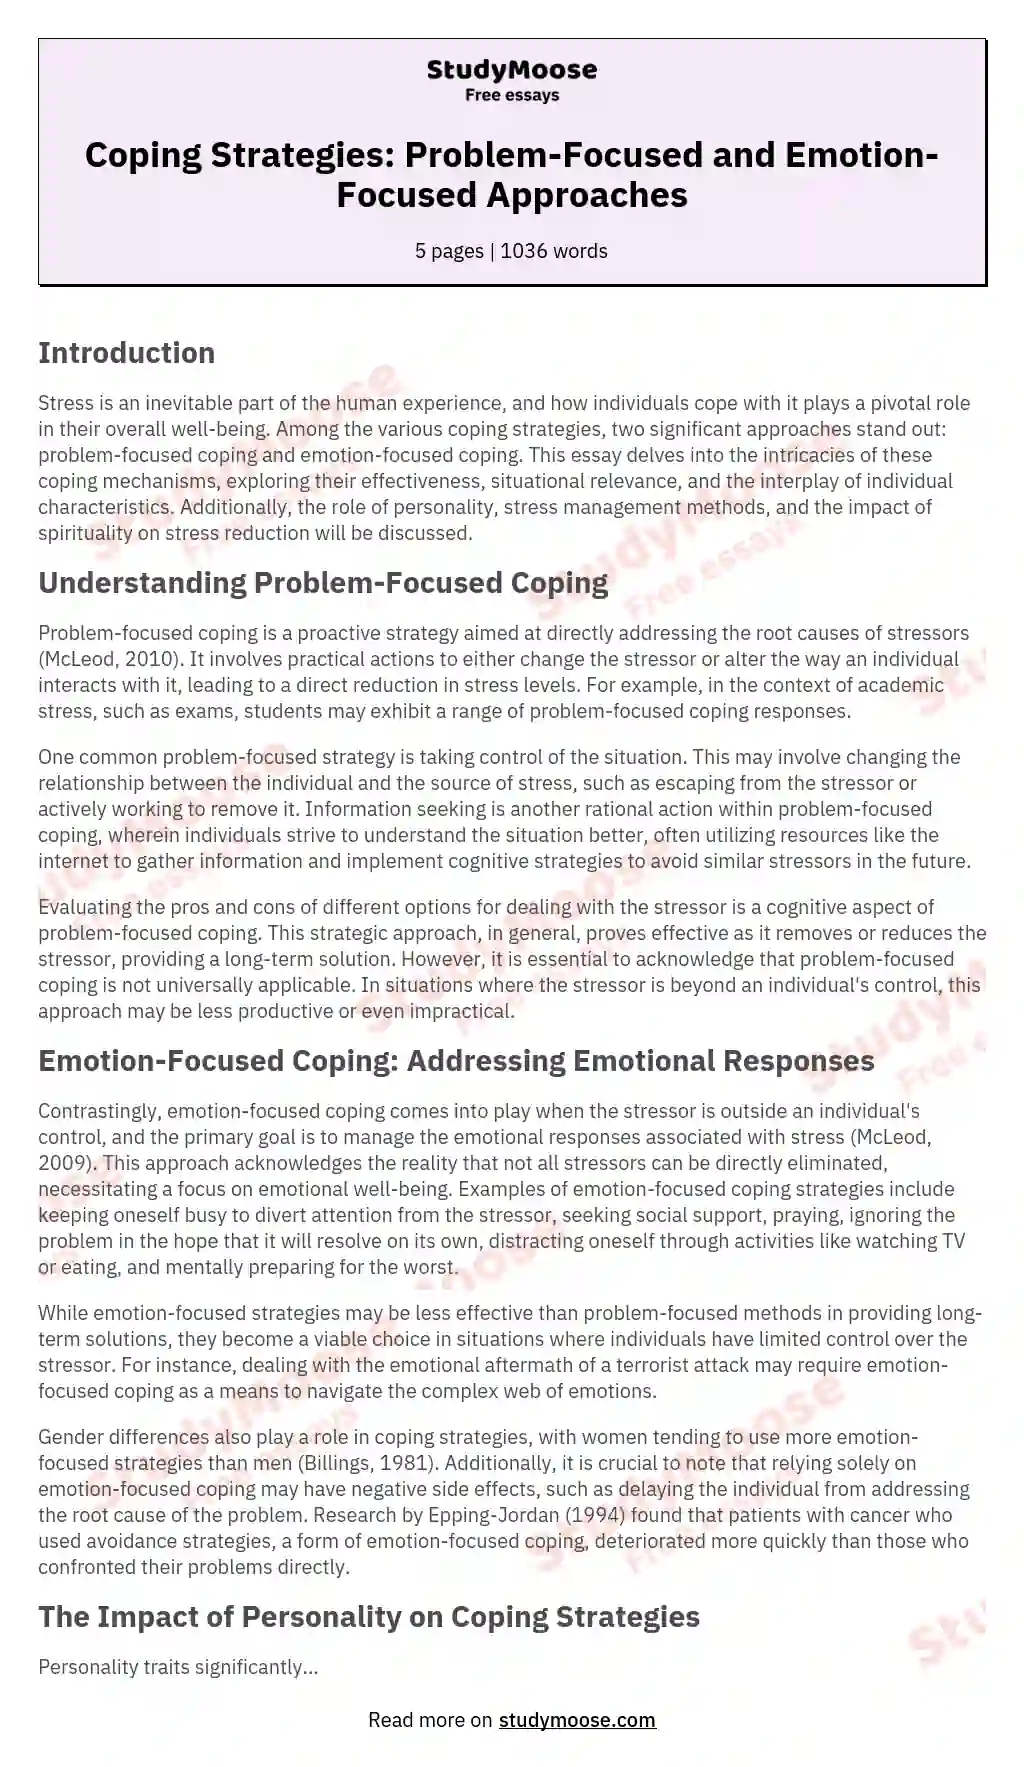 Coping Strategies: Problem-Focused and Emotion-Focused Approaches essay